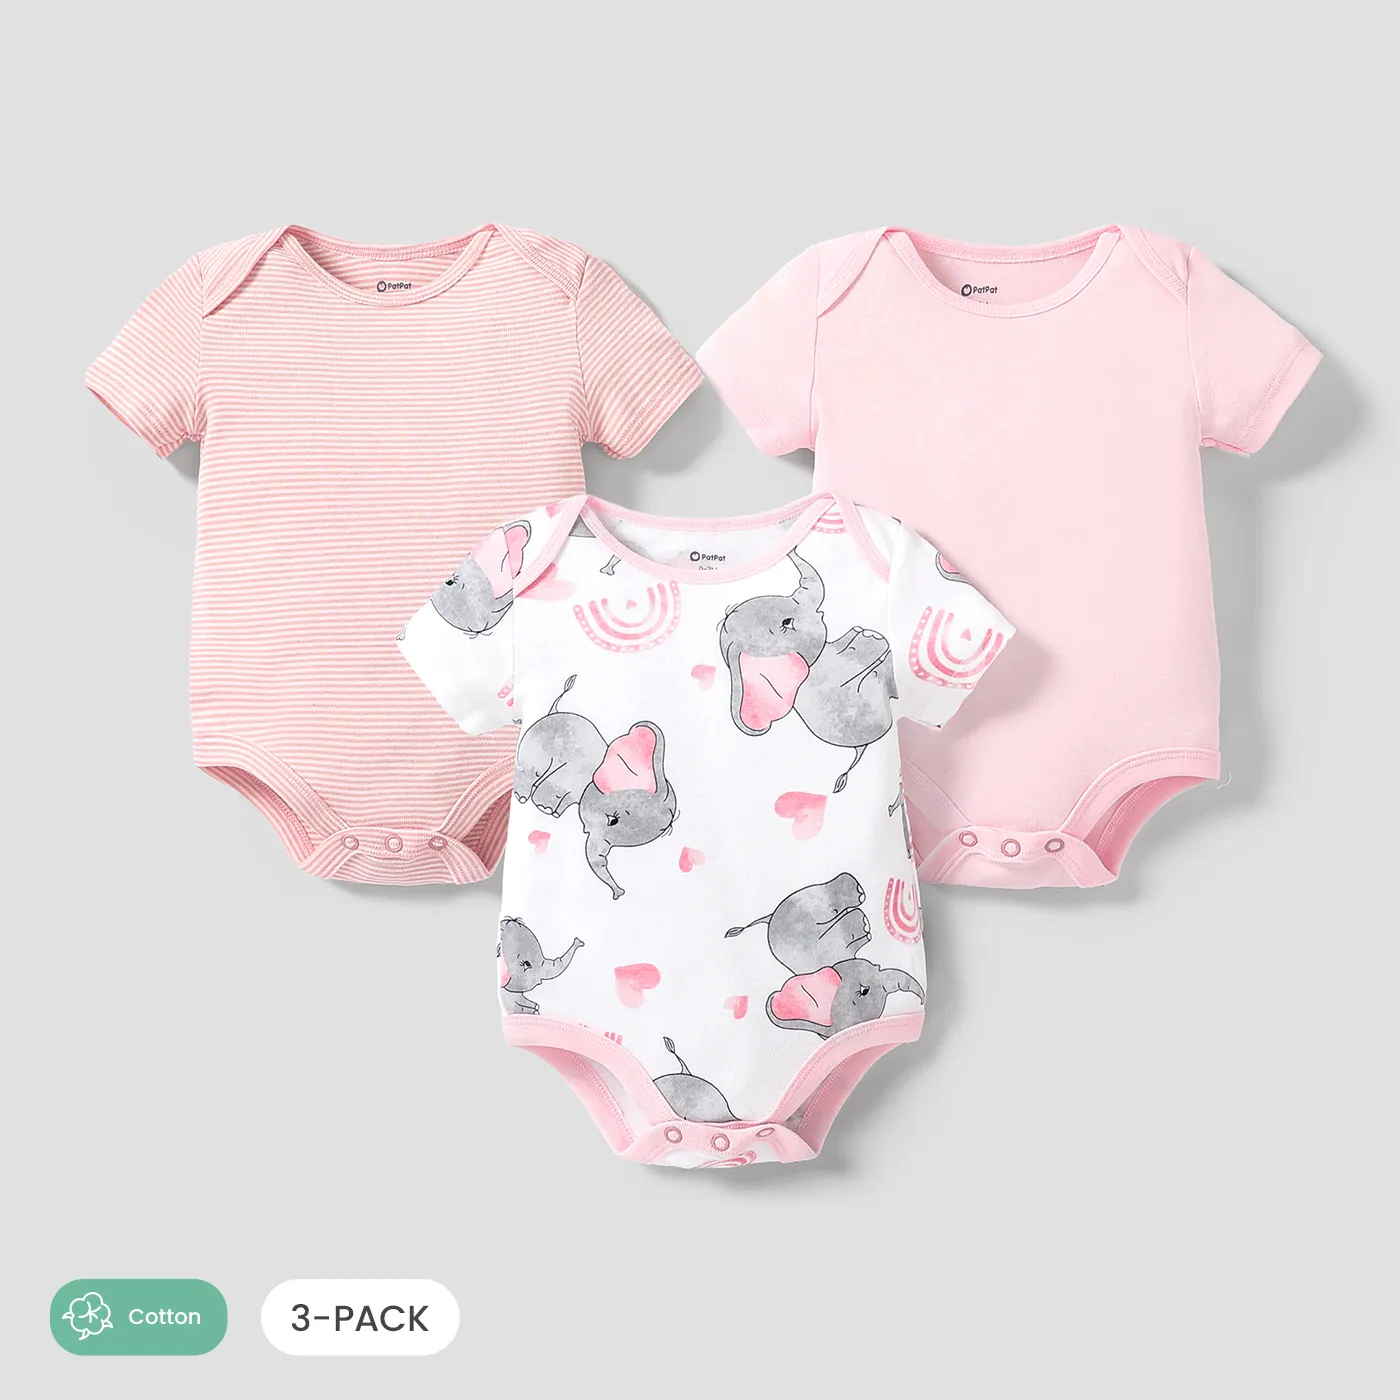 3-Pack Baby Girl/Boy Elephant Print/Solid Color Short-sleeve Rompers